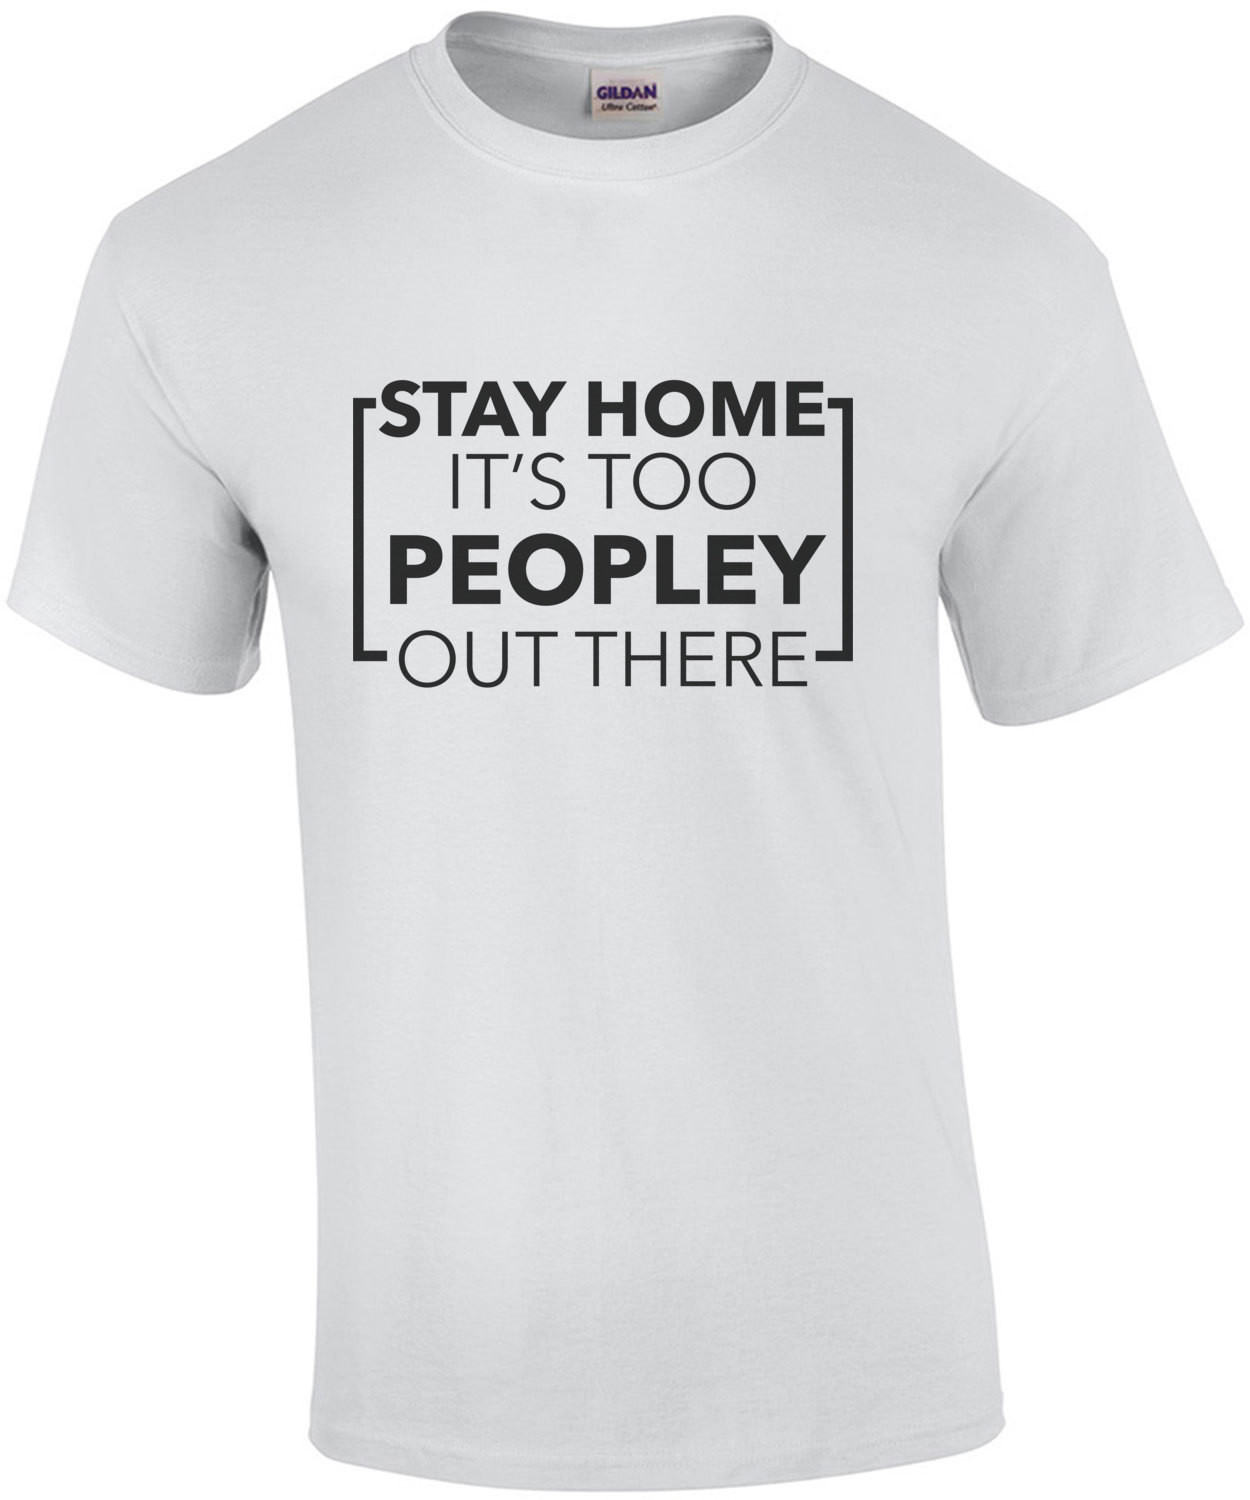 Stay Home it's too peopley out there - funny t-shirt